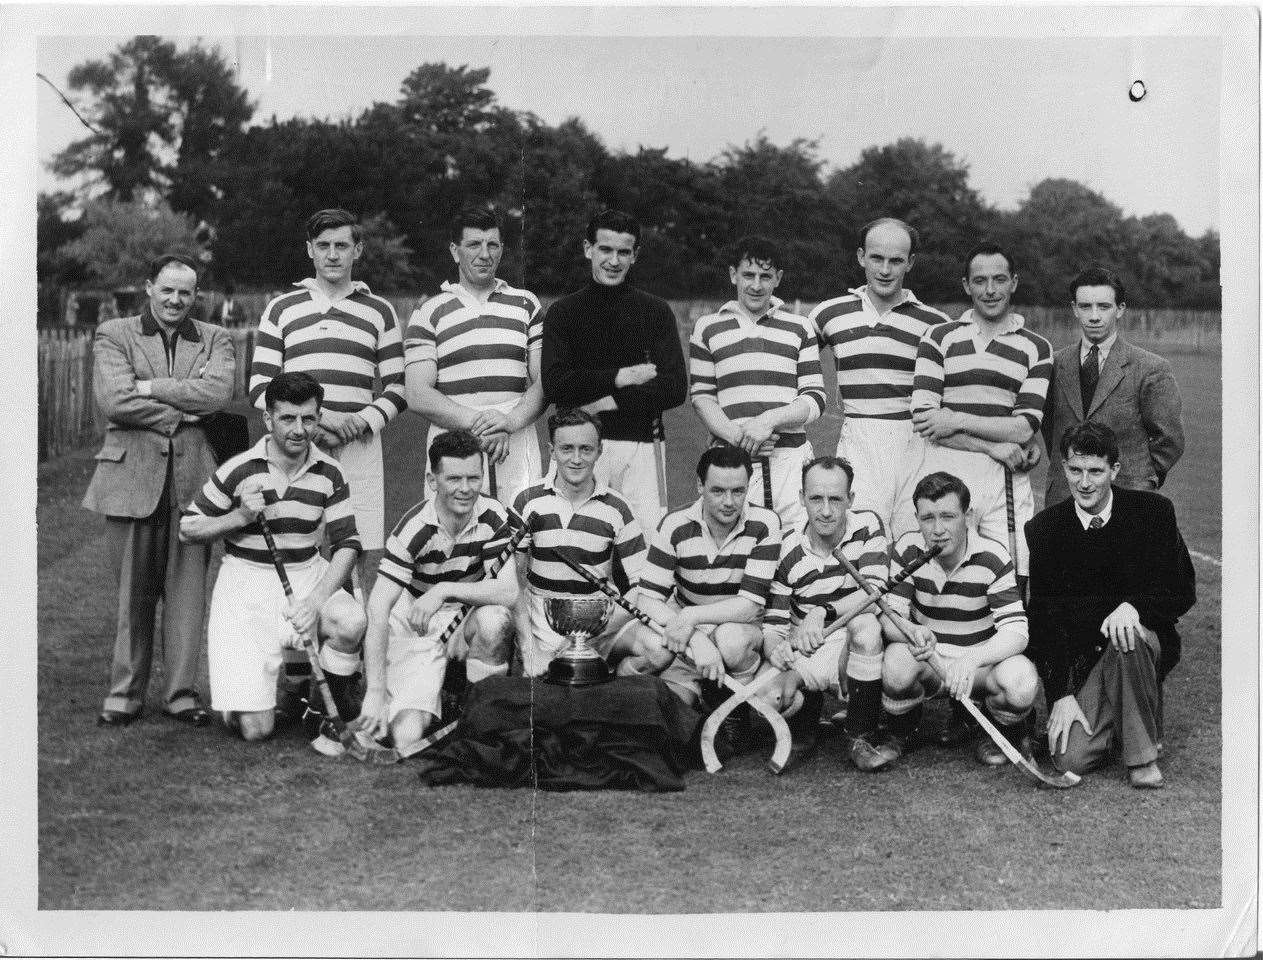 Behind the trophy, Denis Swanson as Torlundy Cup winning captain in 1951. he scored the winning goal against Oban Celtic.